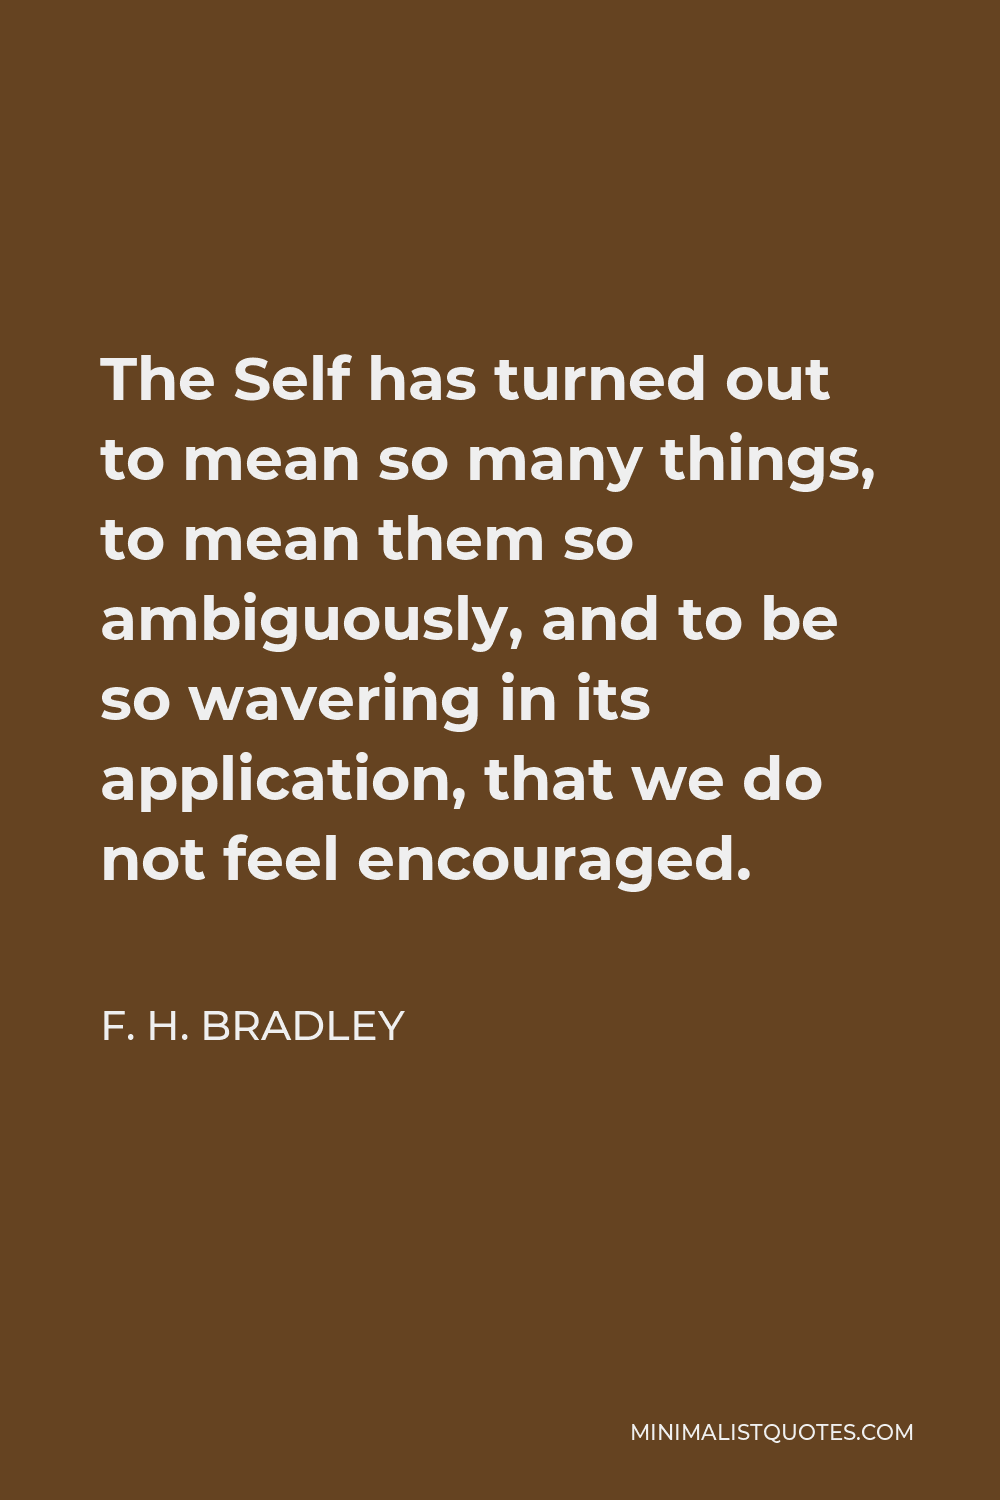 F. H. Bradley Quote - The Self has turned out to mean so many things, to mean them so ambiguously, and to be so wavering in its application, that we do not feel encouraged.